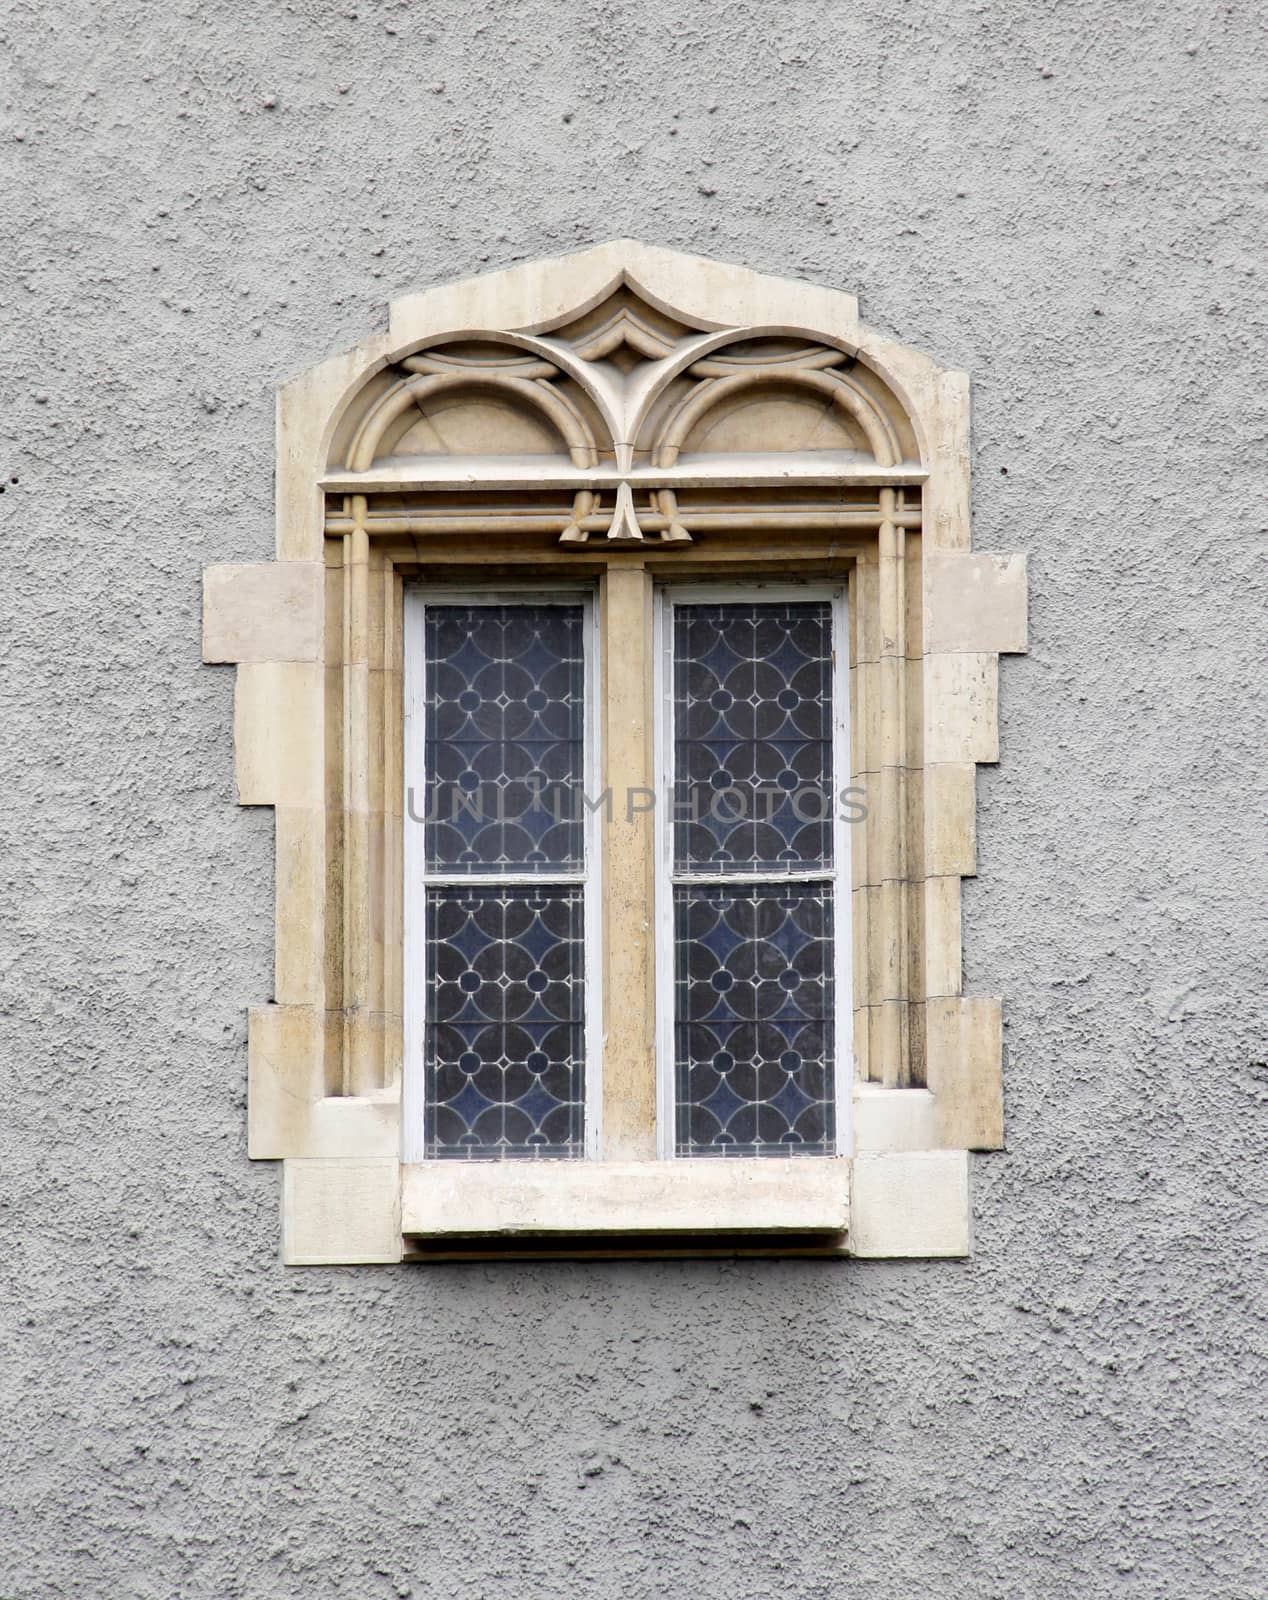 Ornate Gothic castle window in the wall.